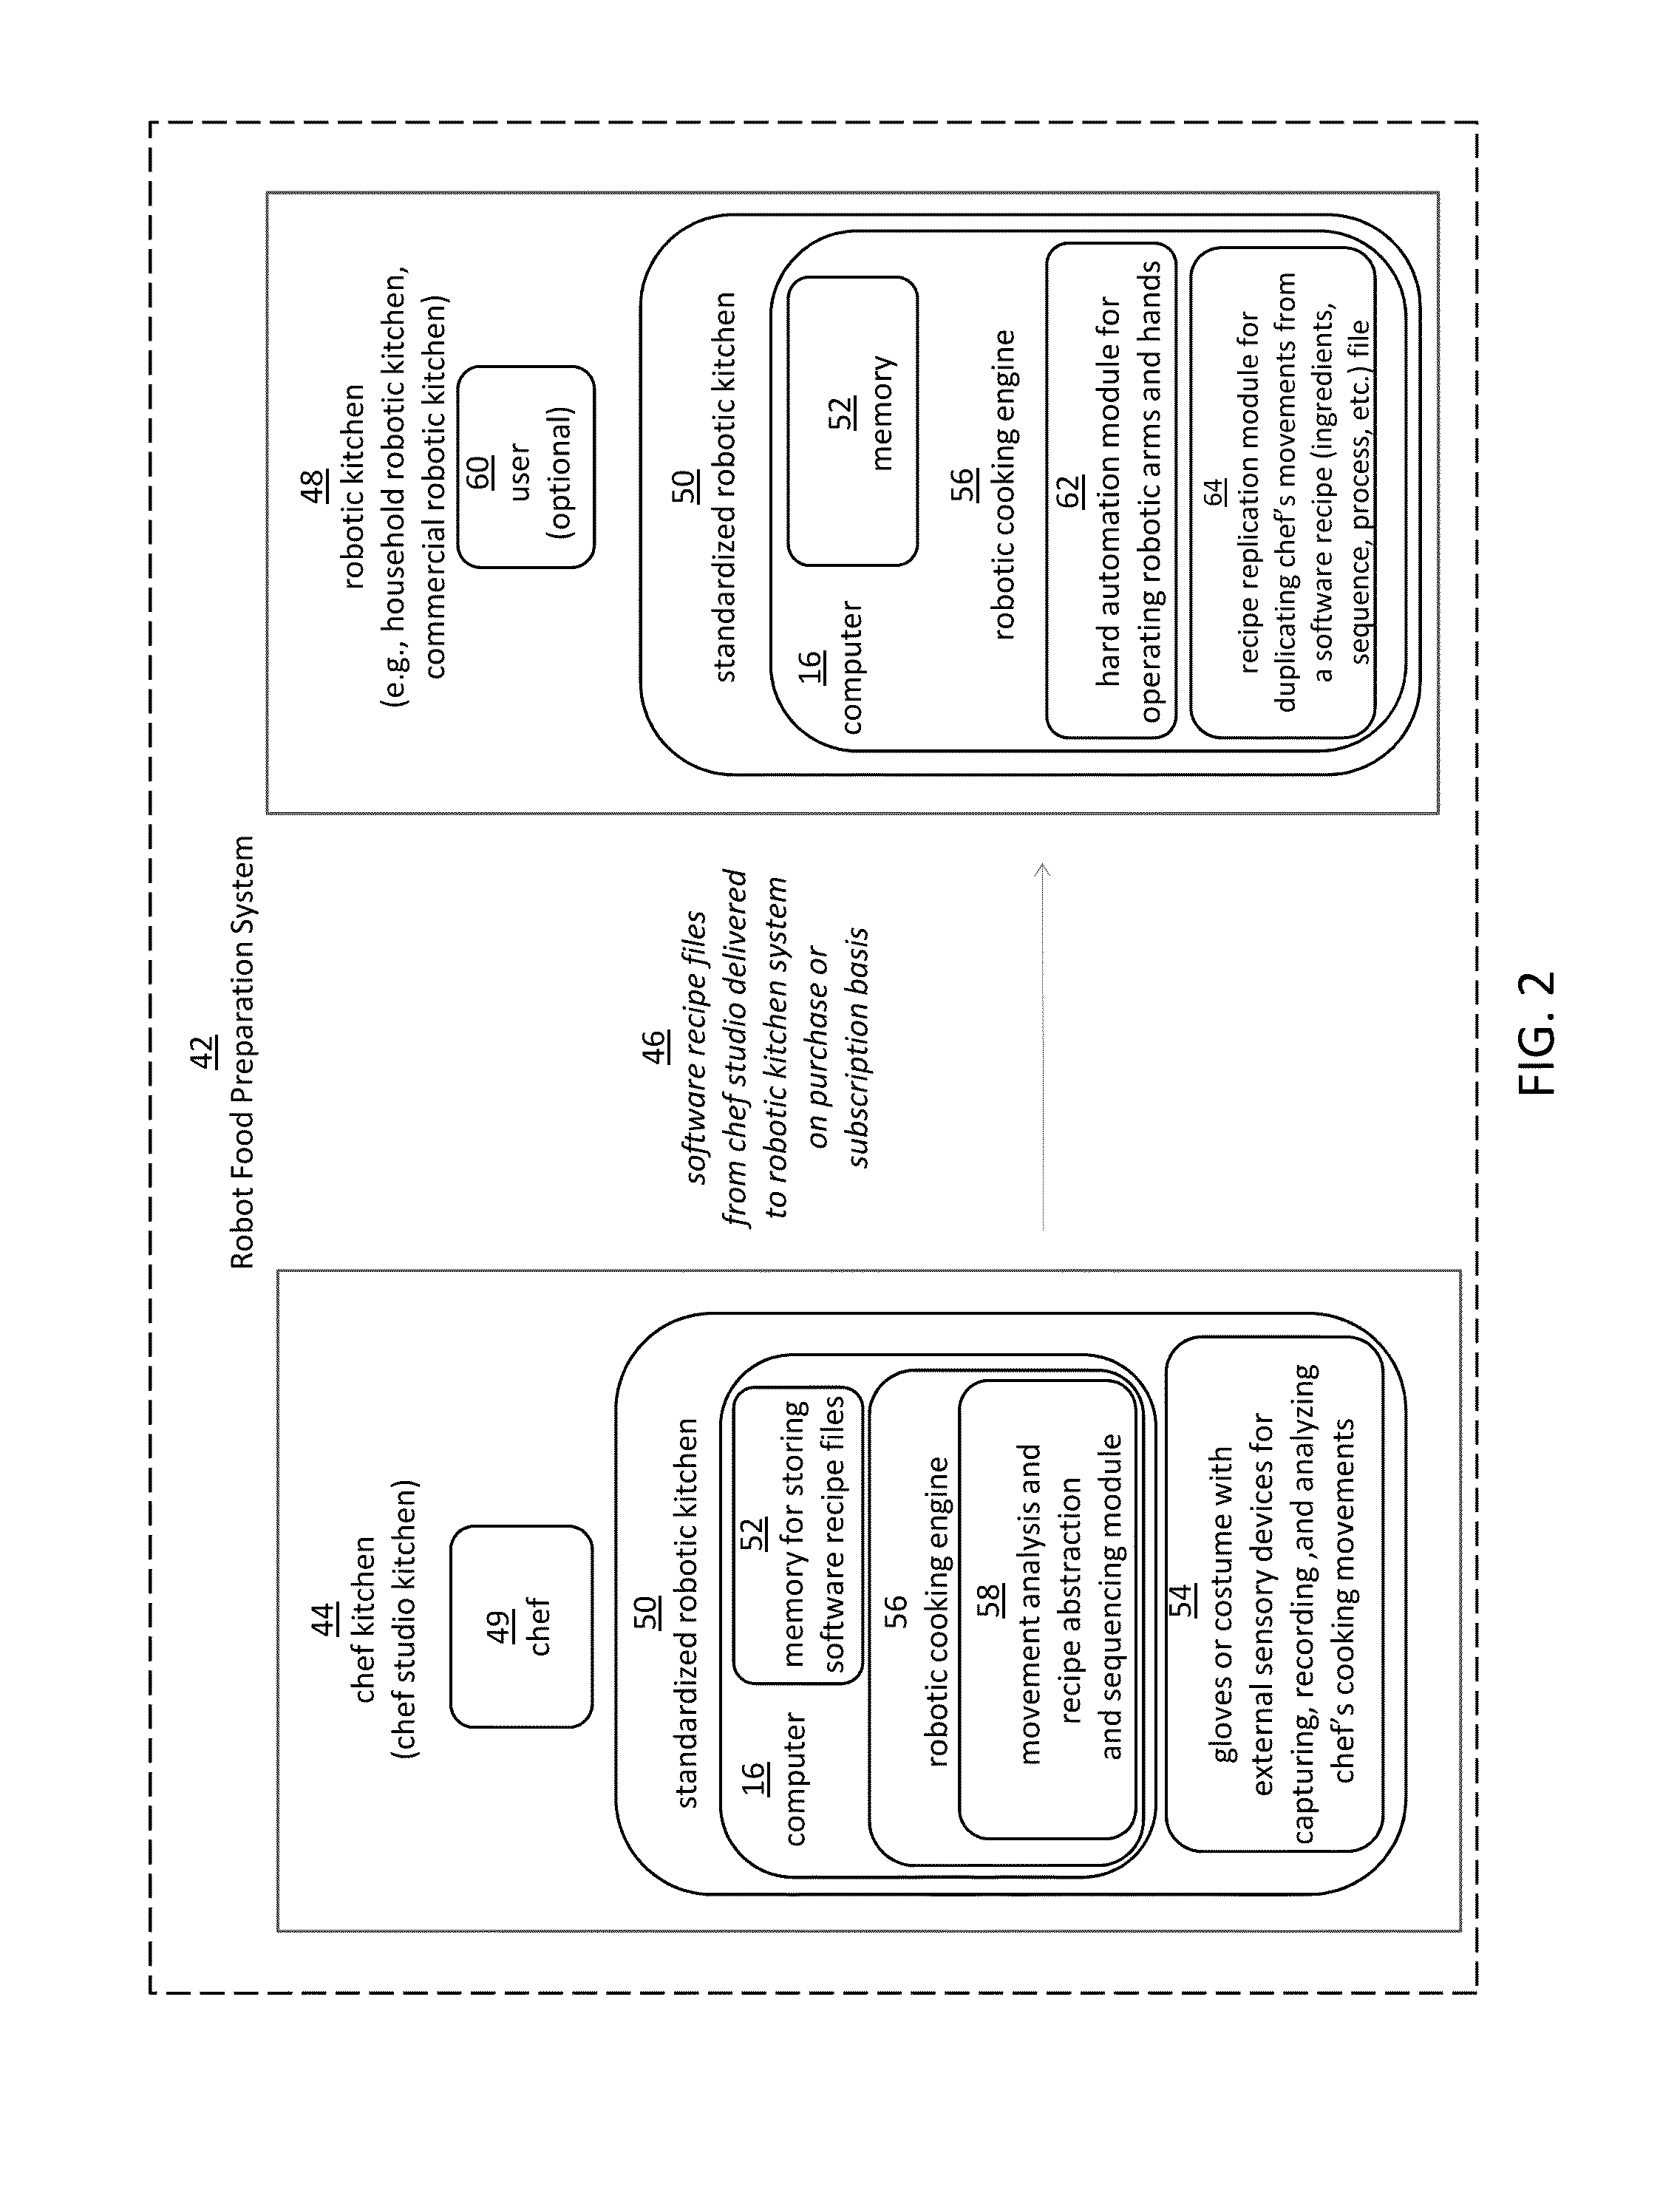 Robotic manipulation methods and systems for executing a domain-specific application in an instrumented environment with electronic minimanipulation libraries